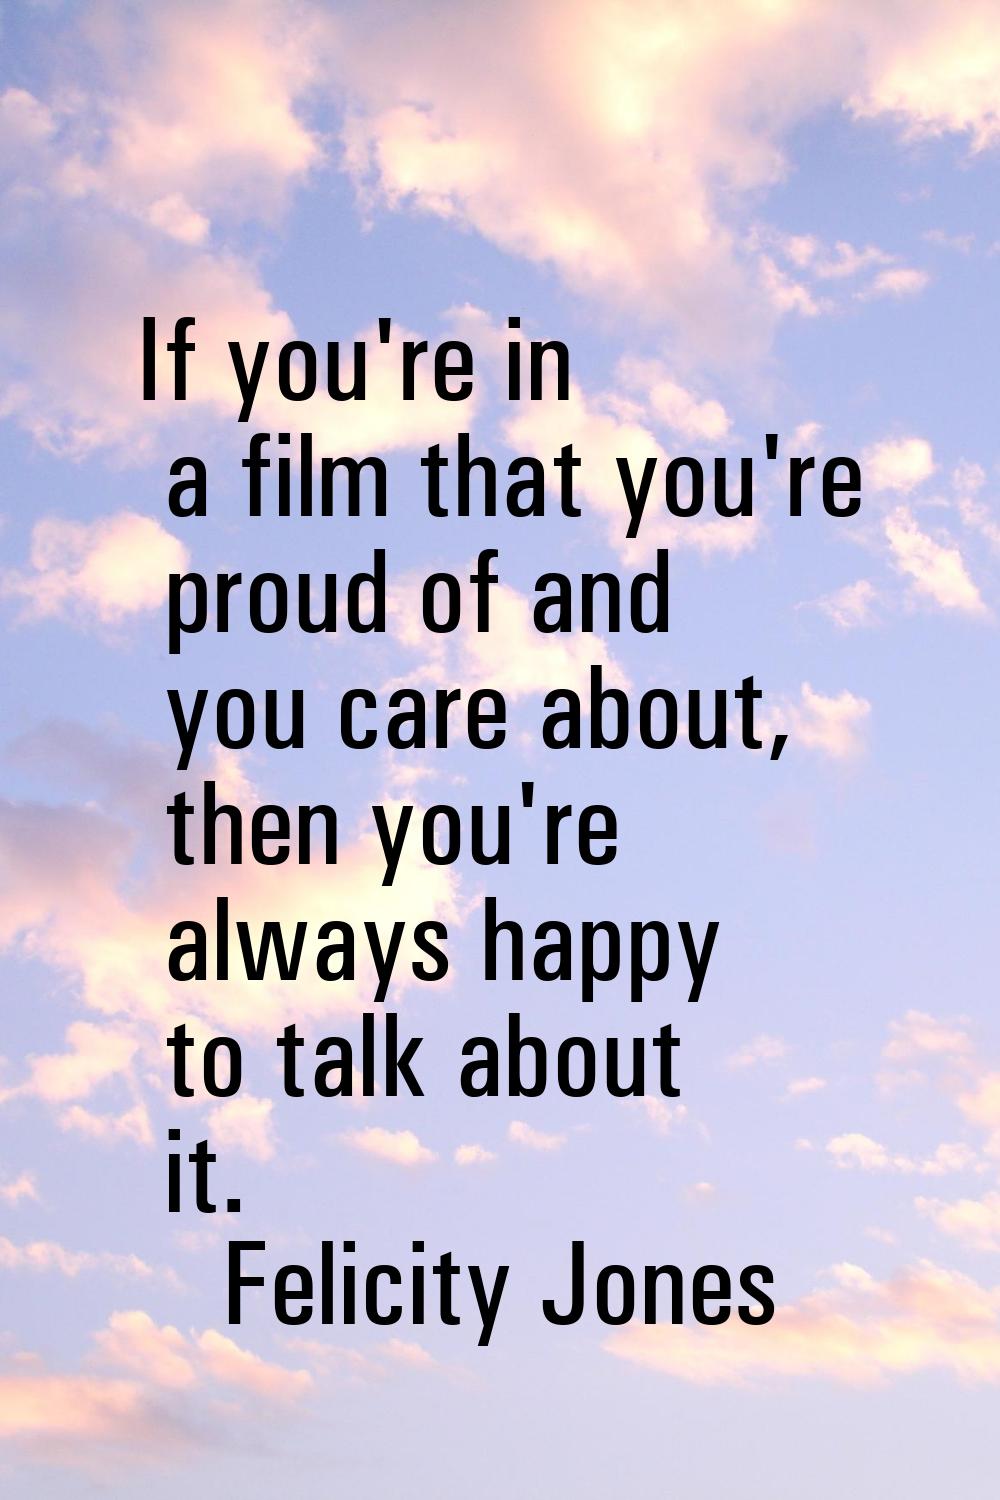 If you're in a film that you're proud of and you care about, then you're always happy to talk about